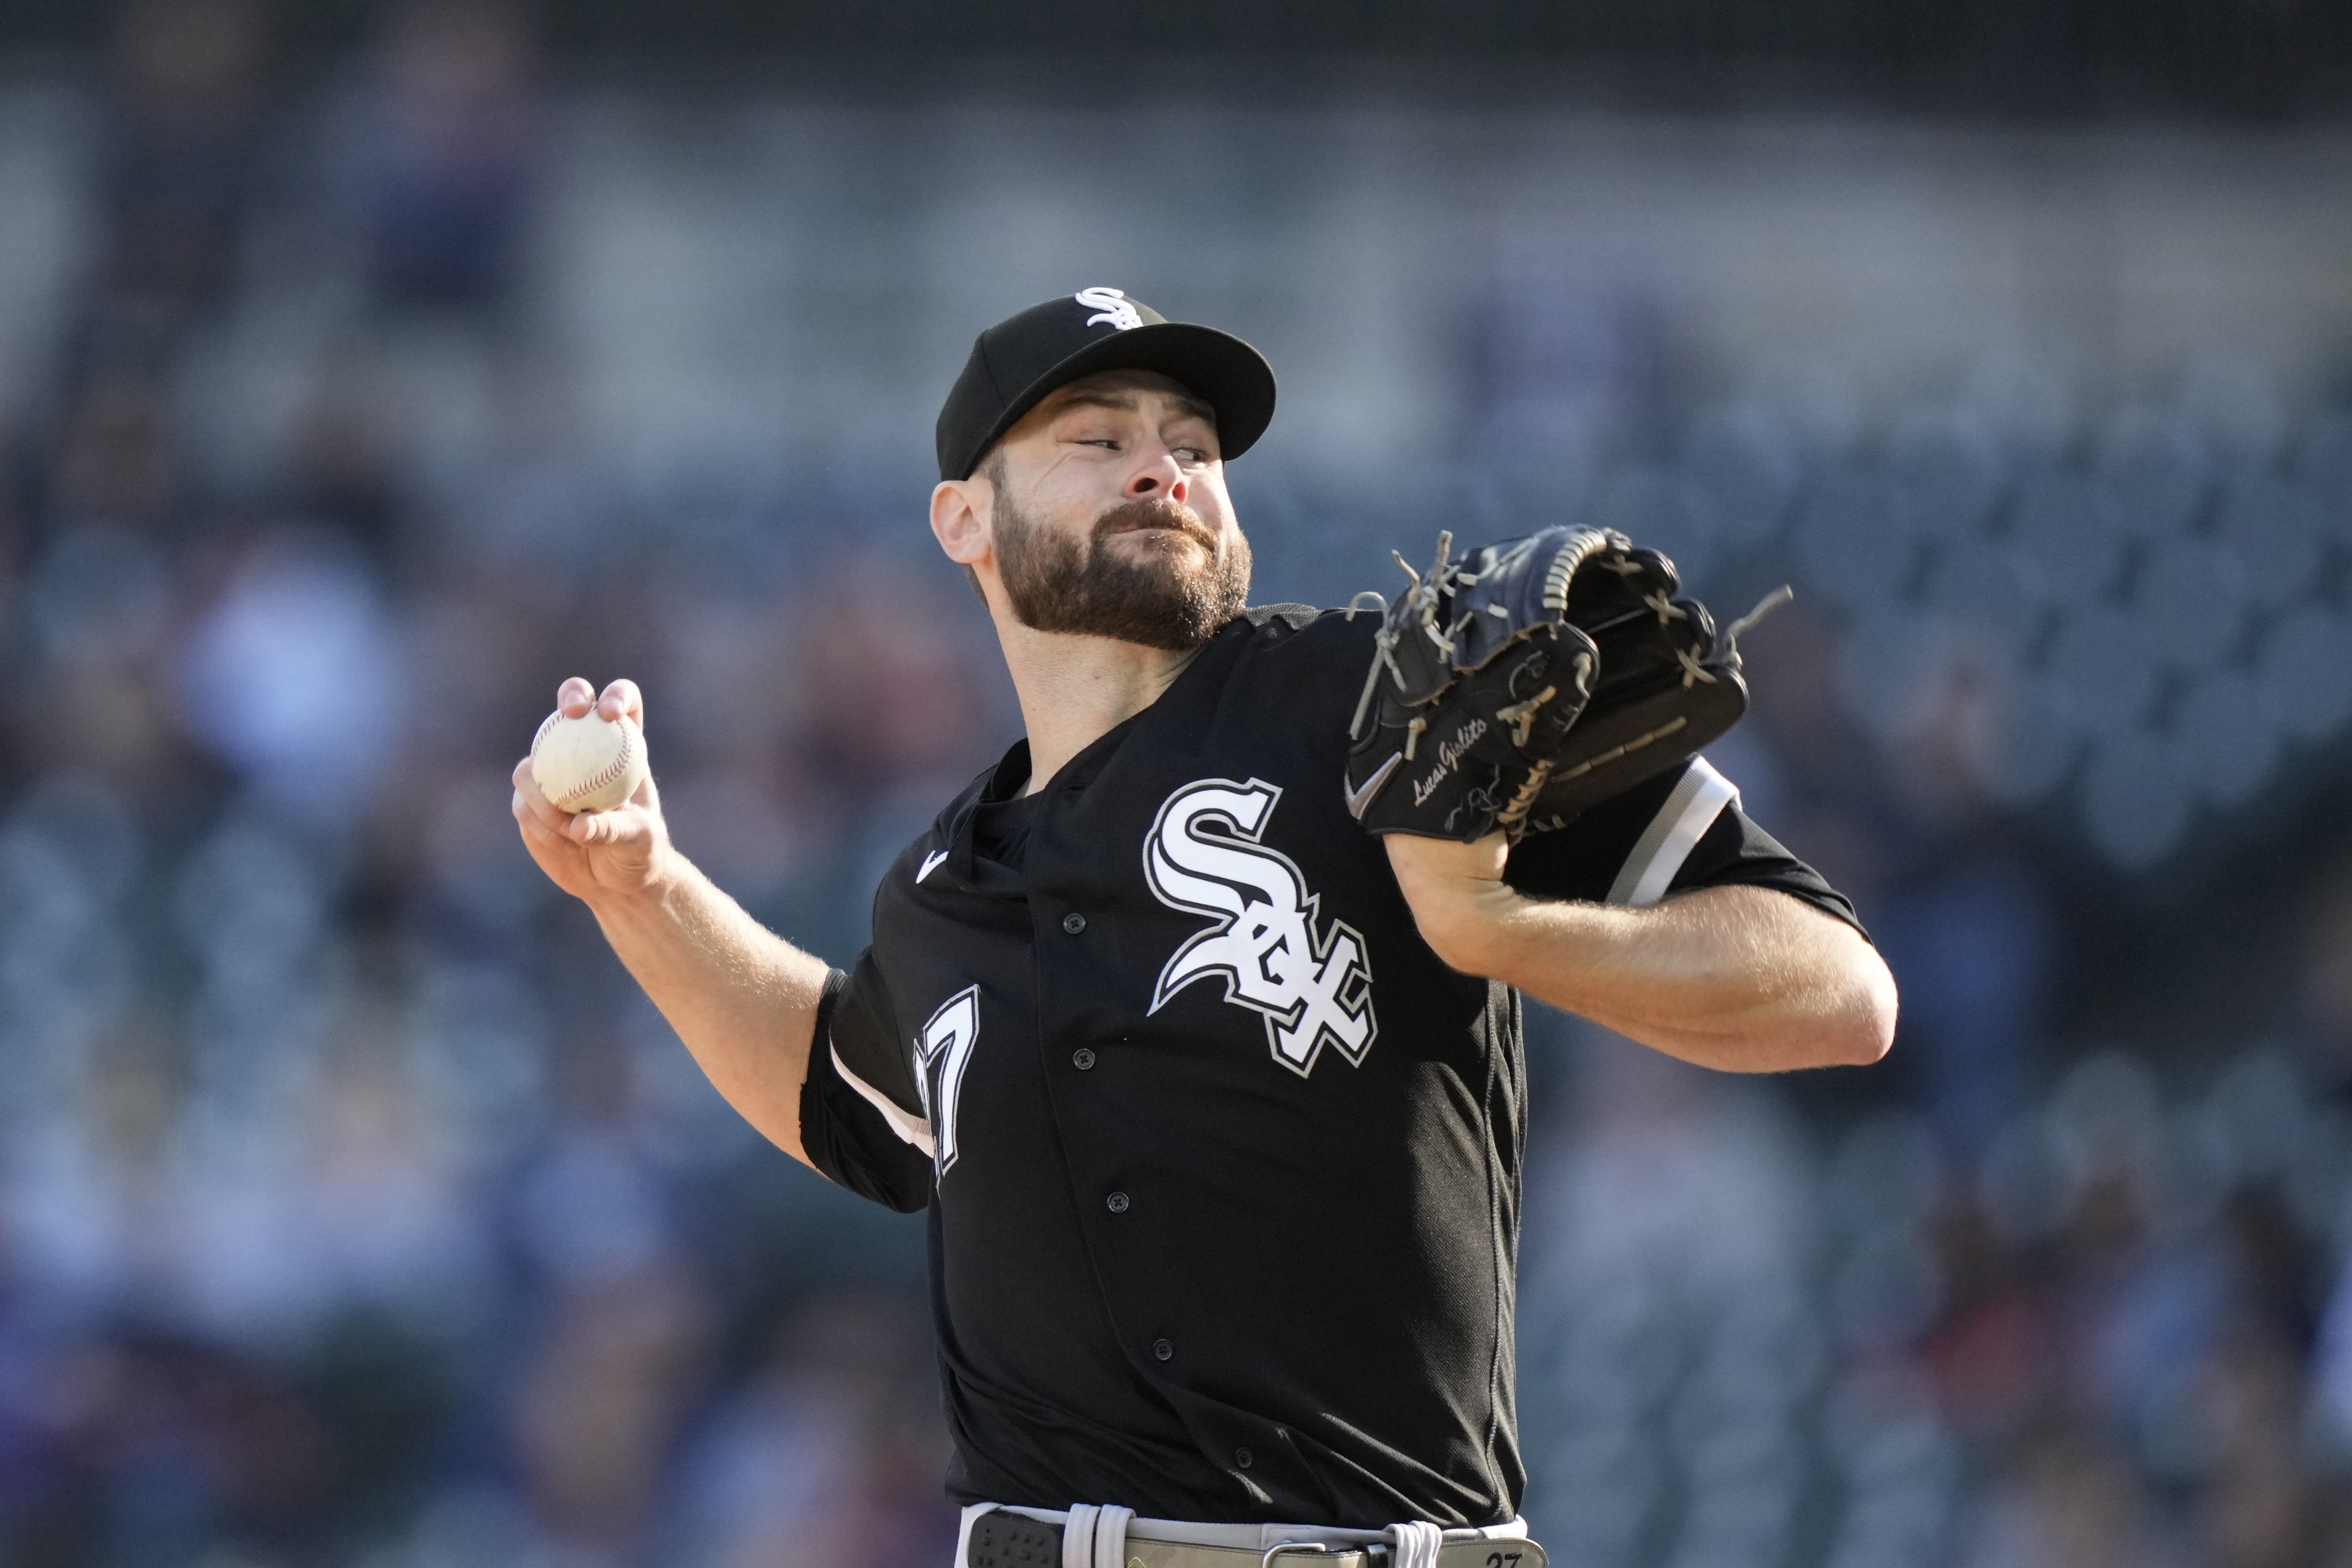 How can the Chicago White Sox rebound?